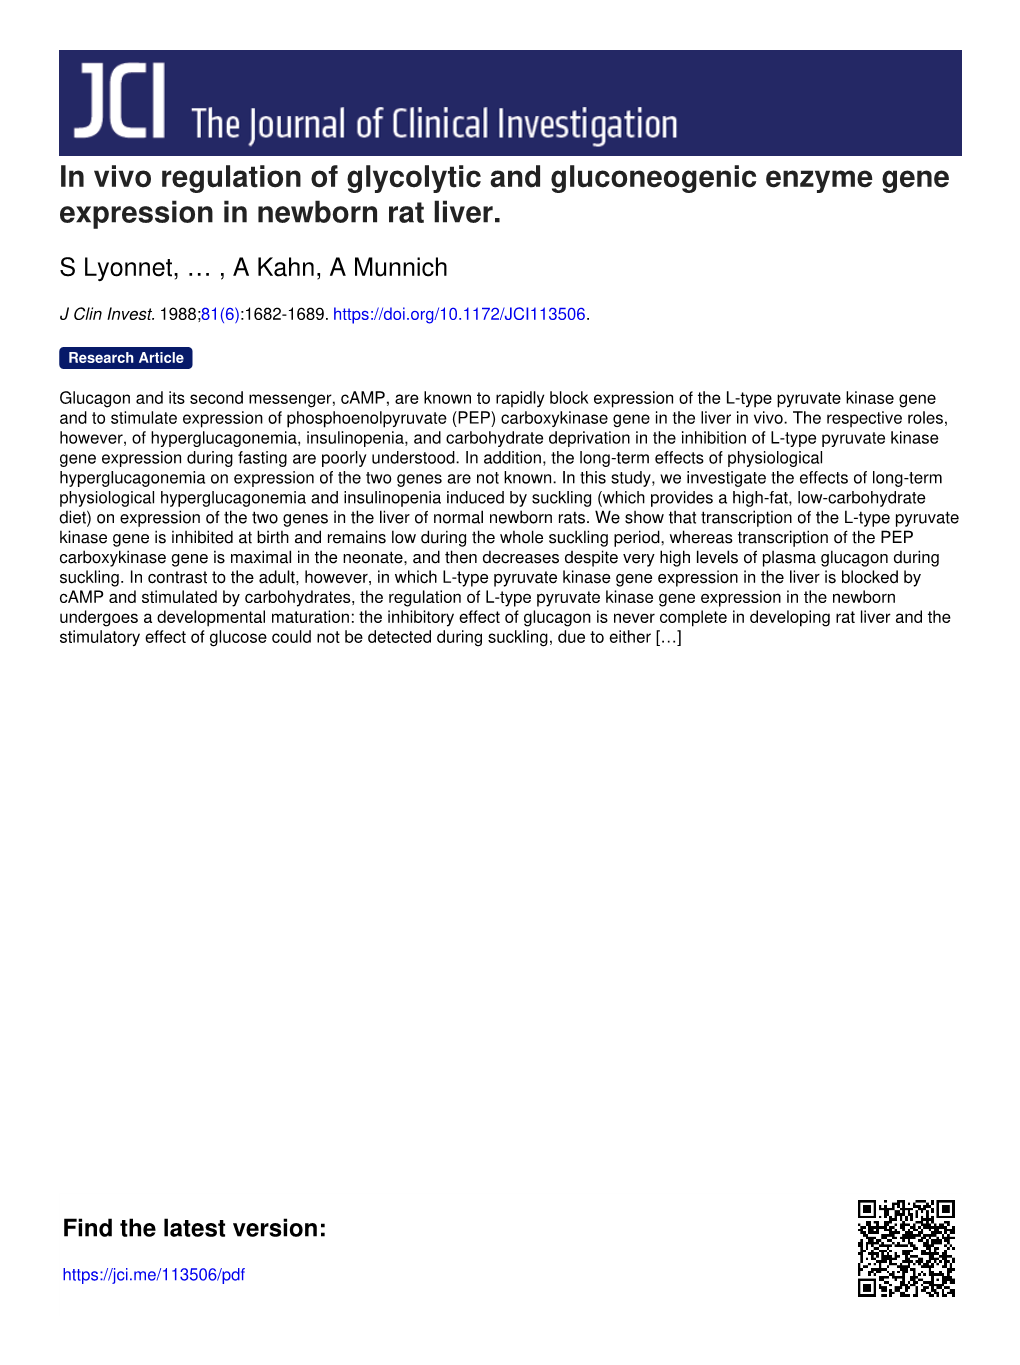 In Vivo Regulation of Glycolytic and Gluconeogenic Enzyme Gene Expression in Newborn Rat Liver